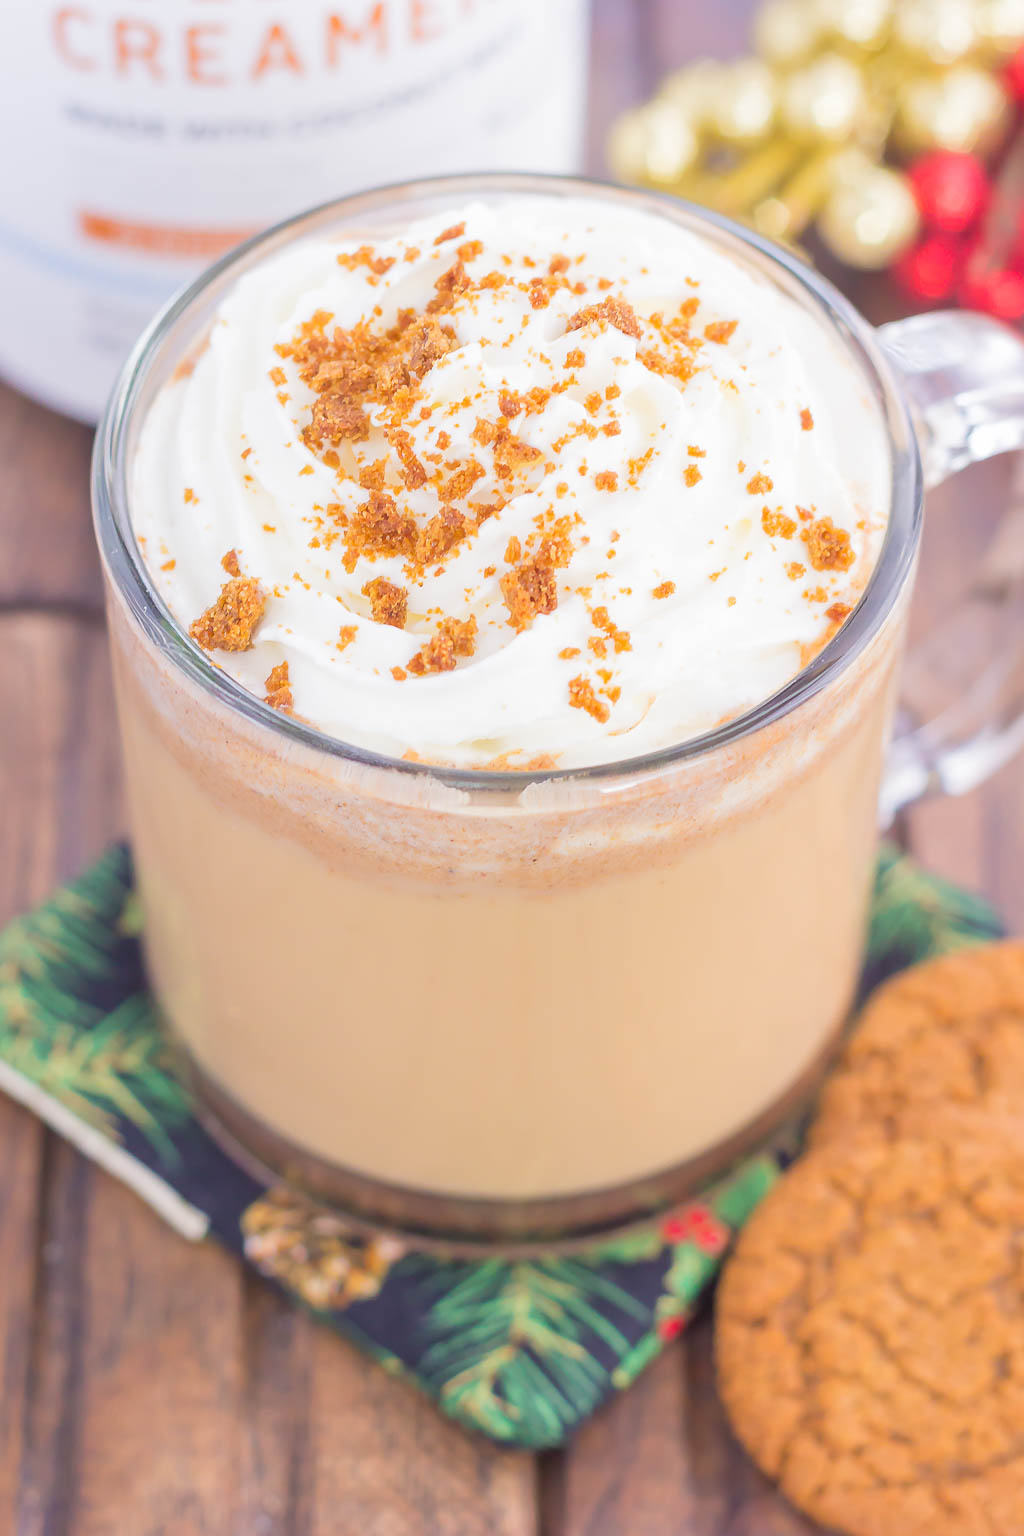 Skip the coffee shop and make your own Spiced Gingerbread Latte to celebrate the the holidays. Filled with cozy spices, lots of flavor, and ready in less than 10 minutes, you can enjoy this warm and festive drink all season long!